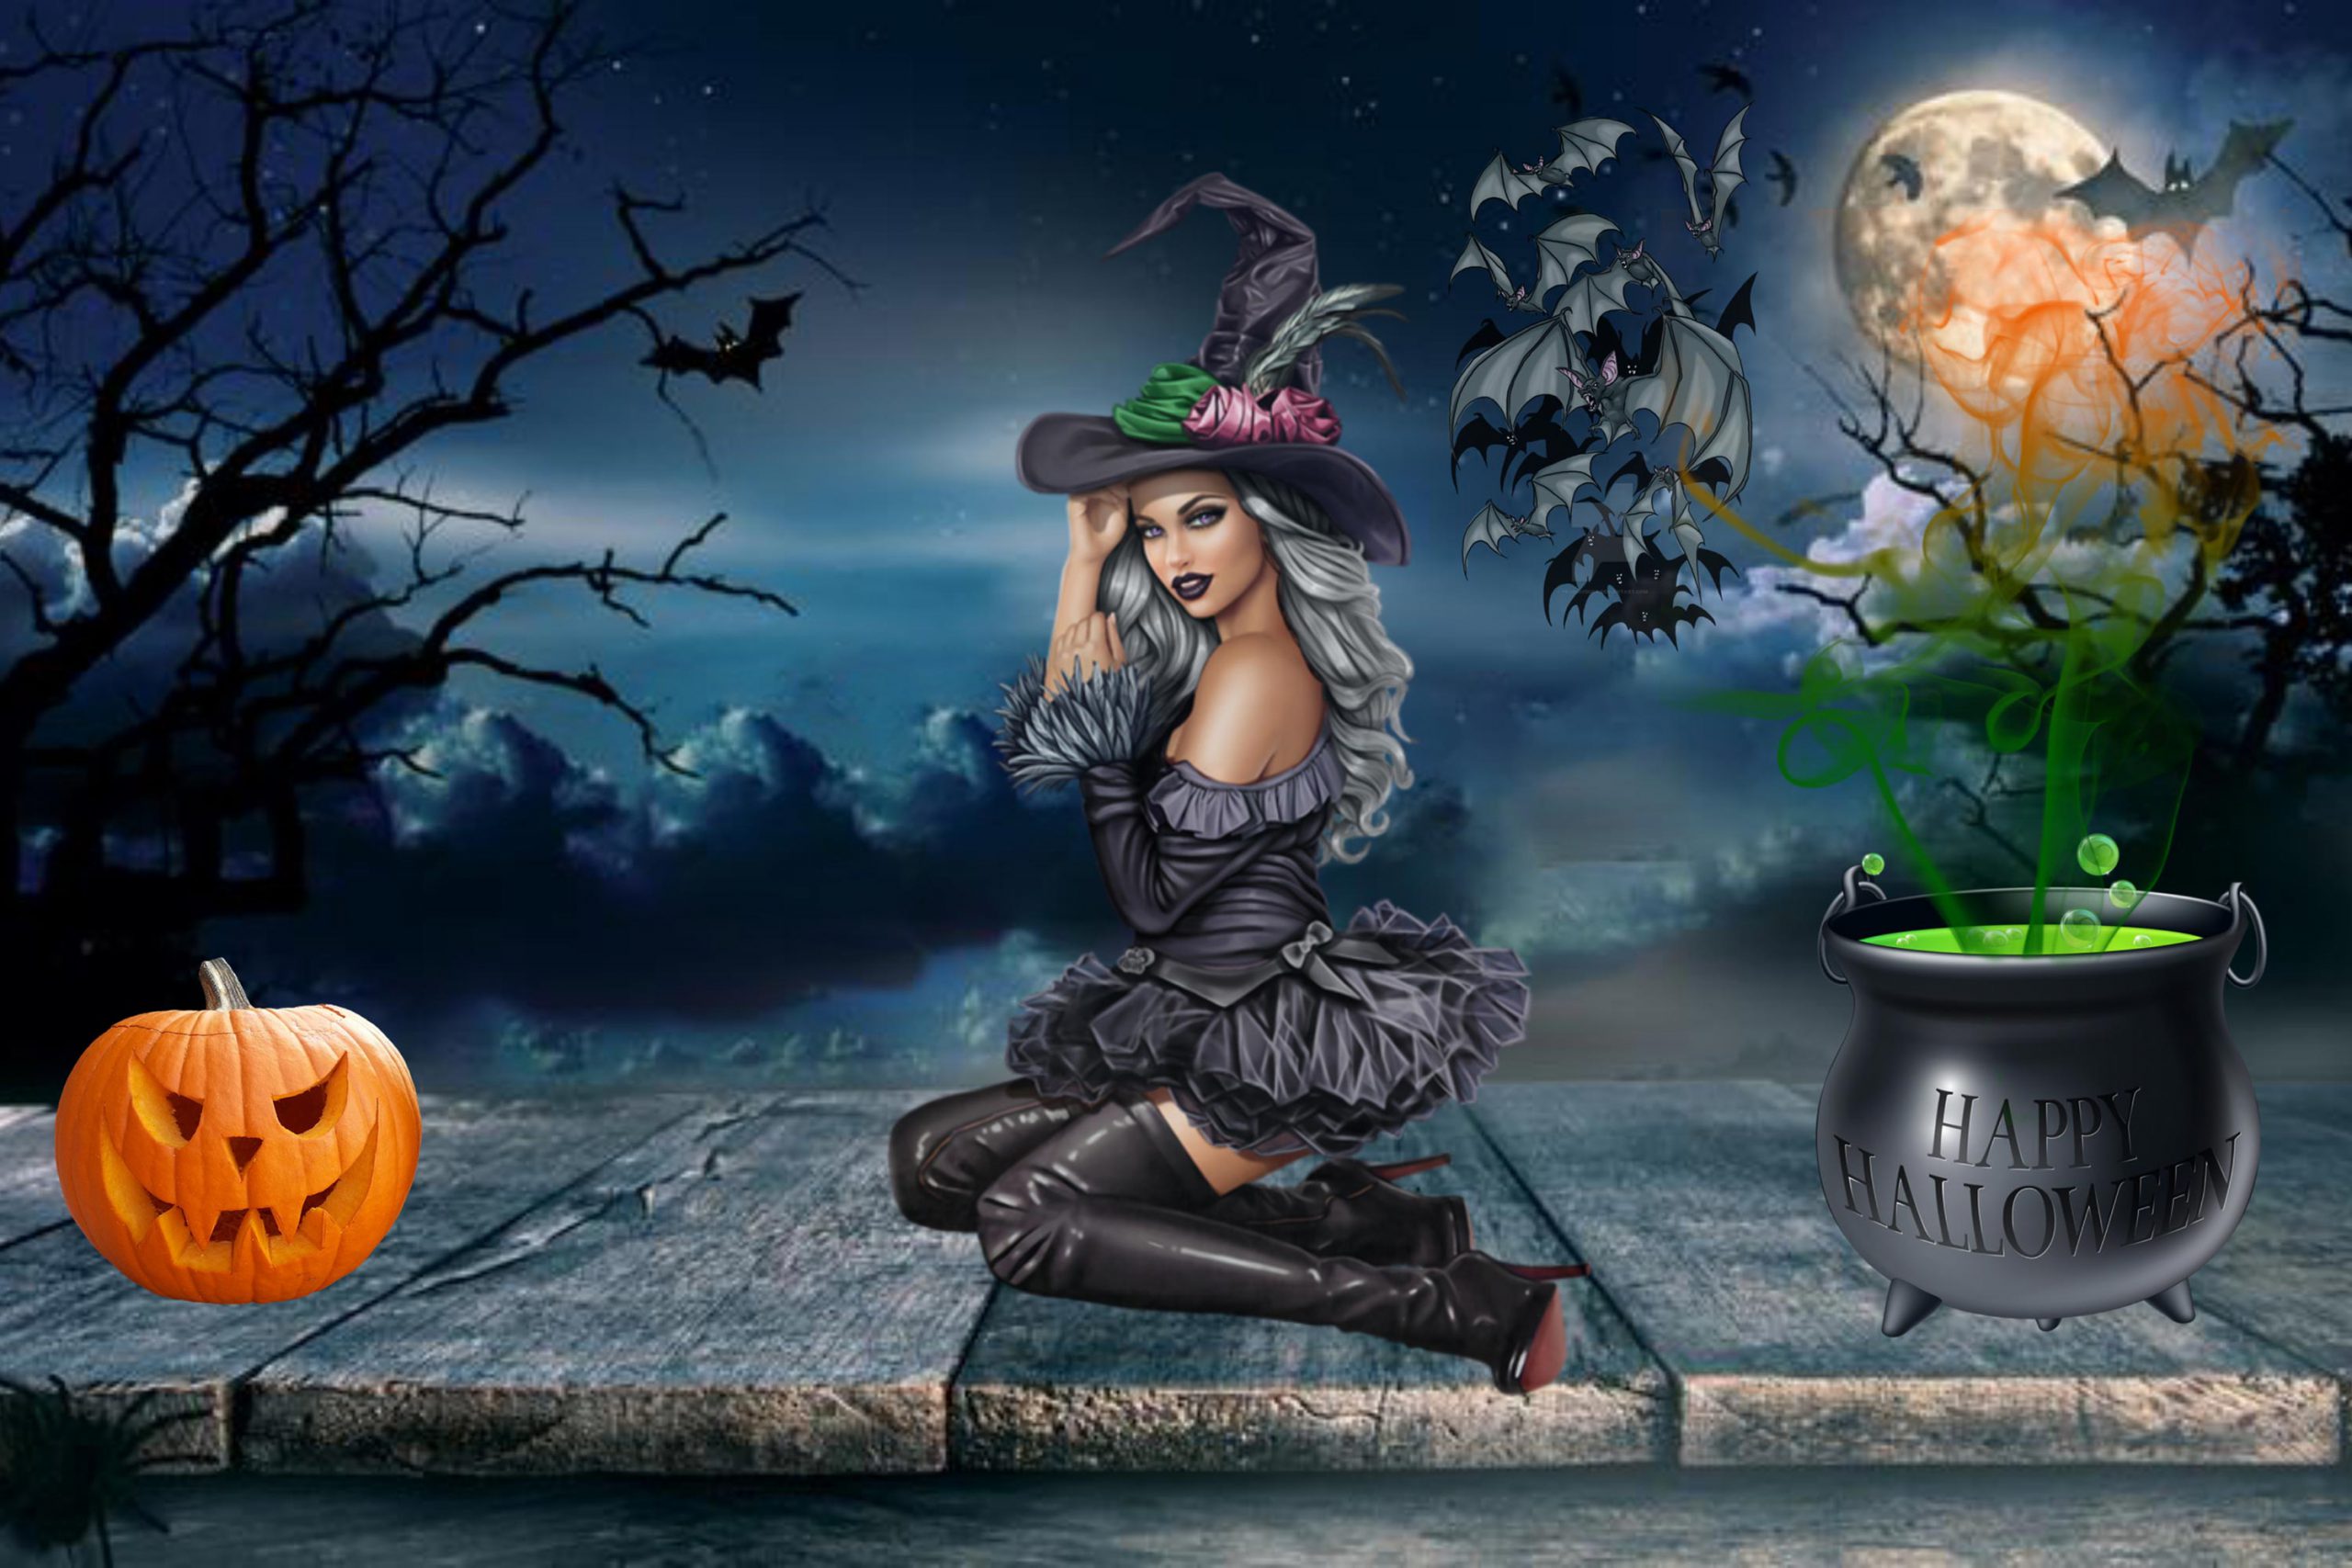 Scary Halloween Wallpaper 2021 HD, Background, Pumpkins, Witches, Bats & Ghosts